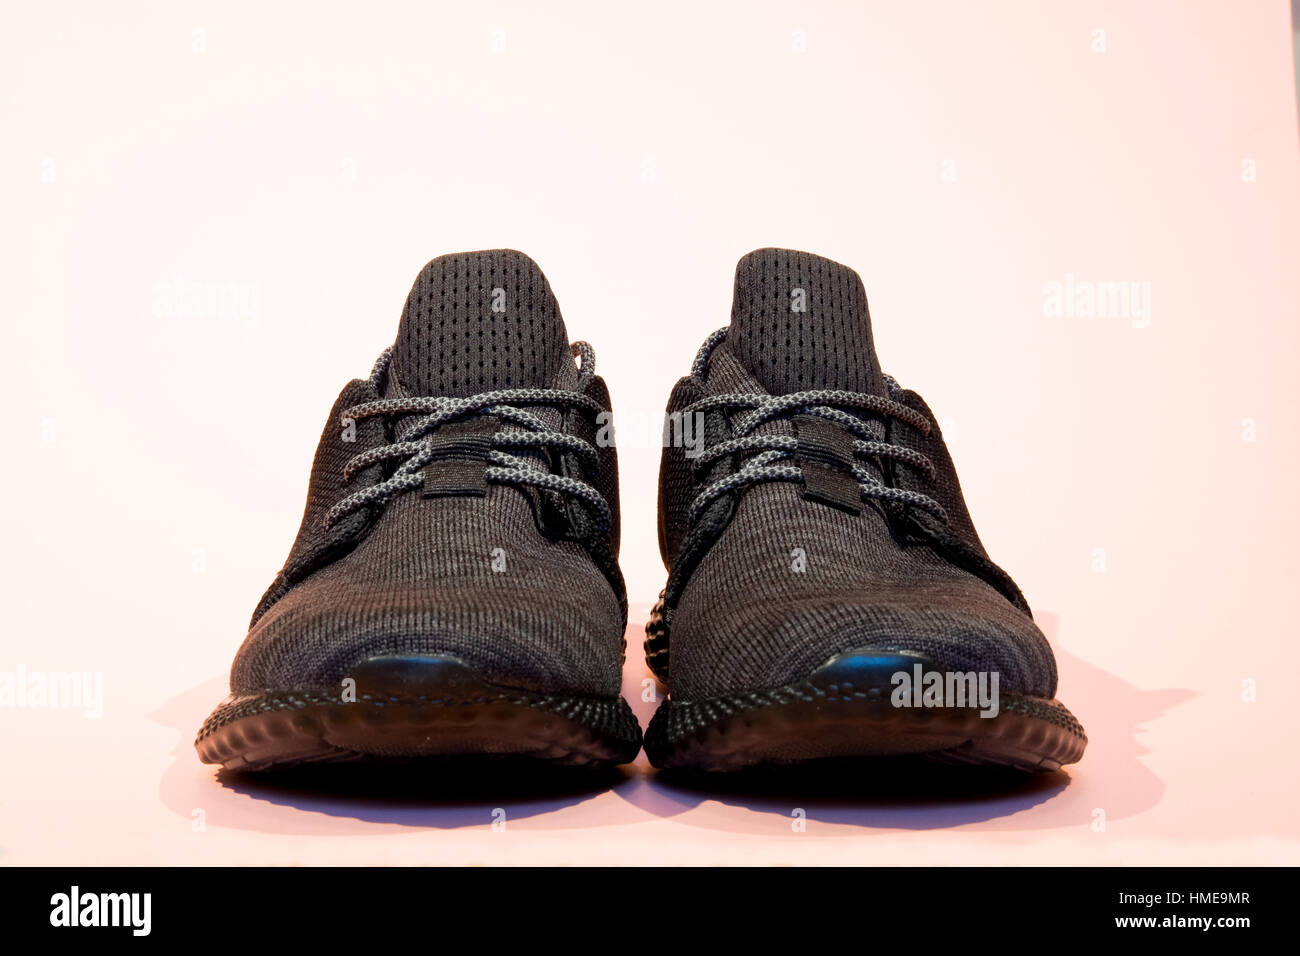 A pair of modern mesh running shoes Stock Photo